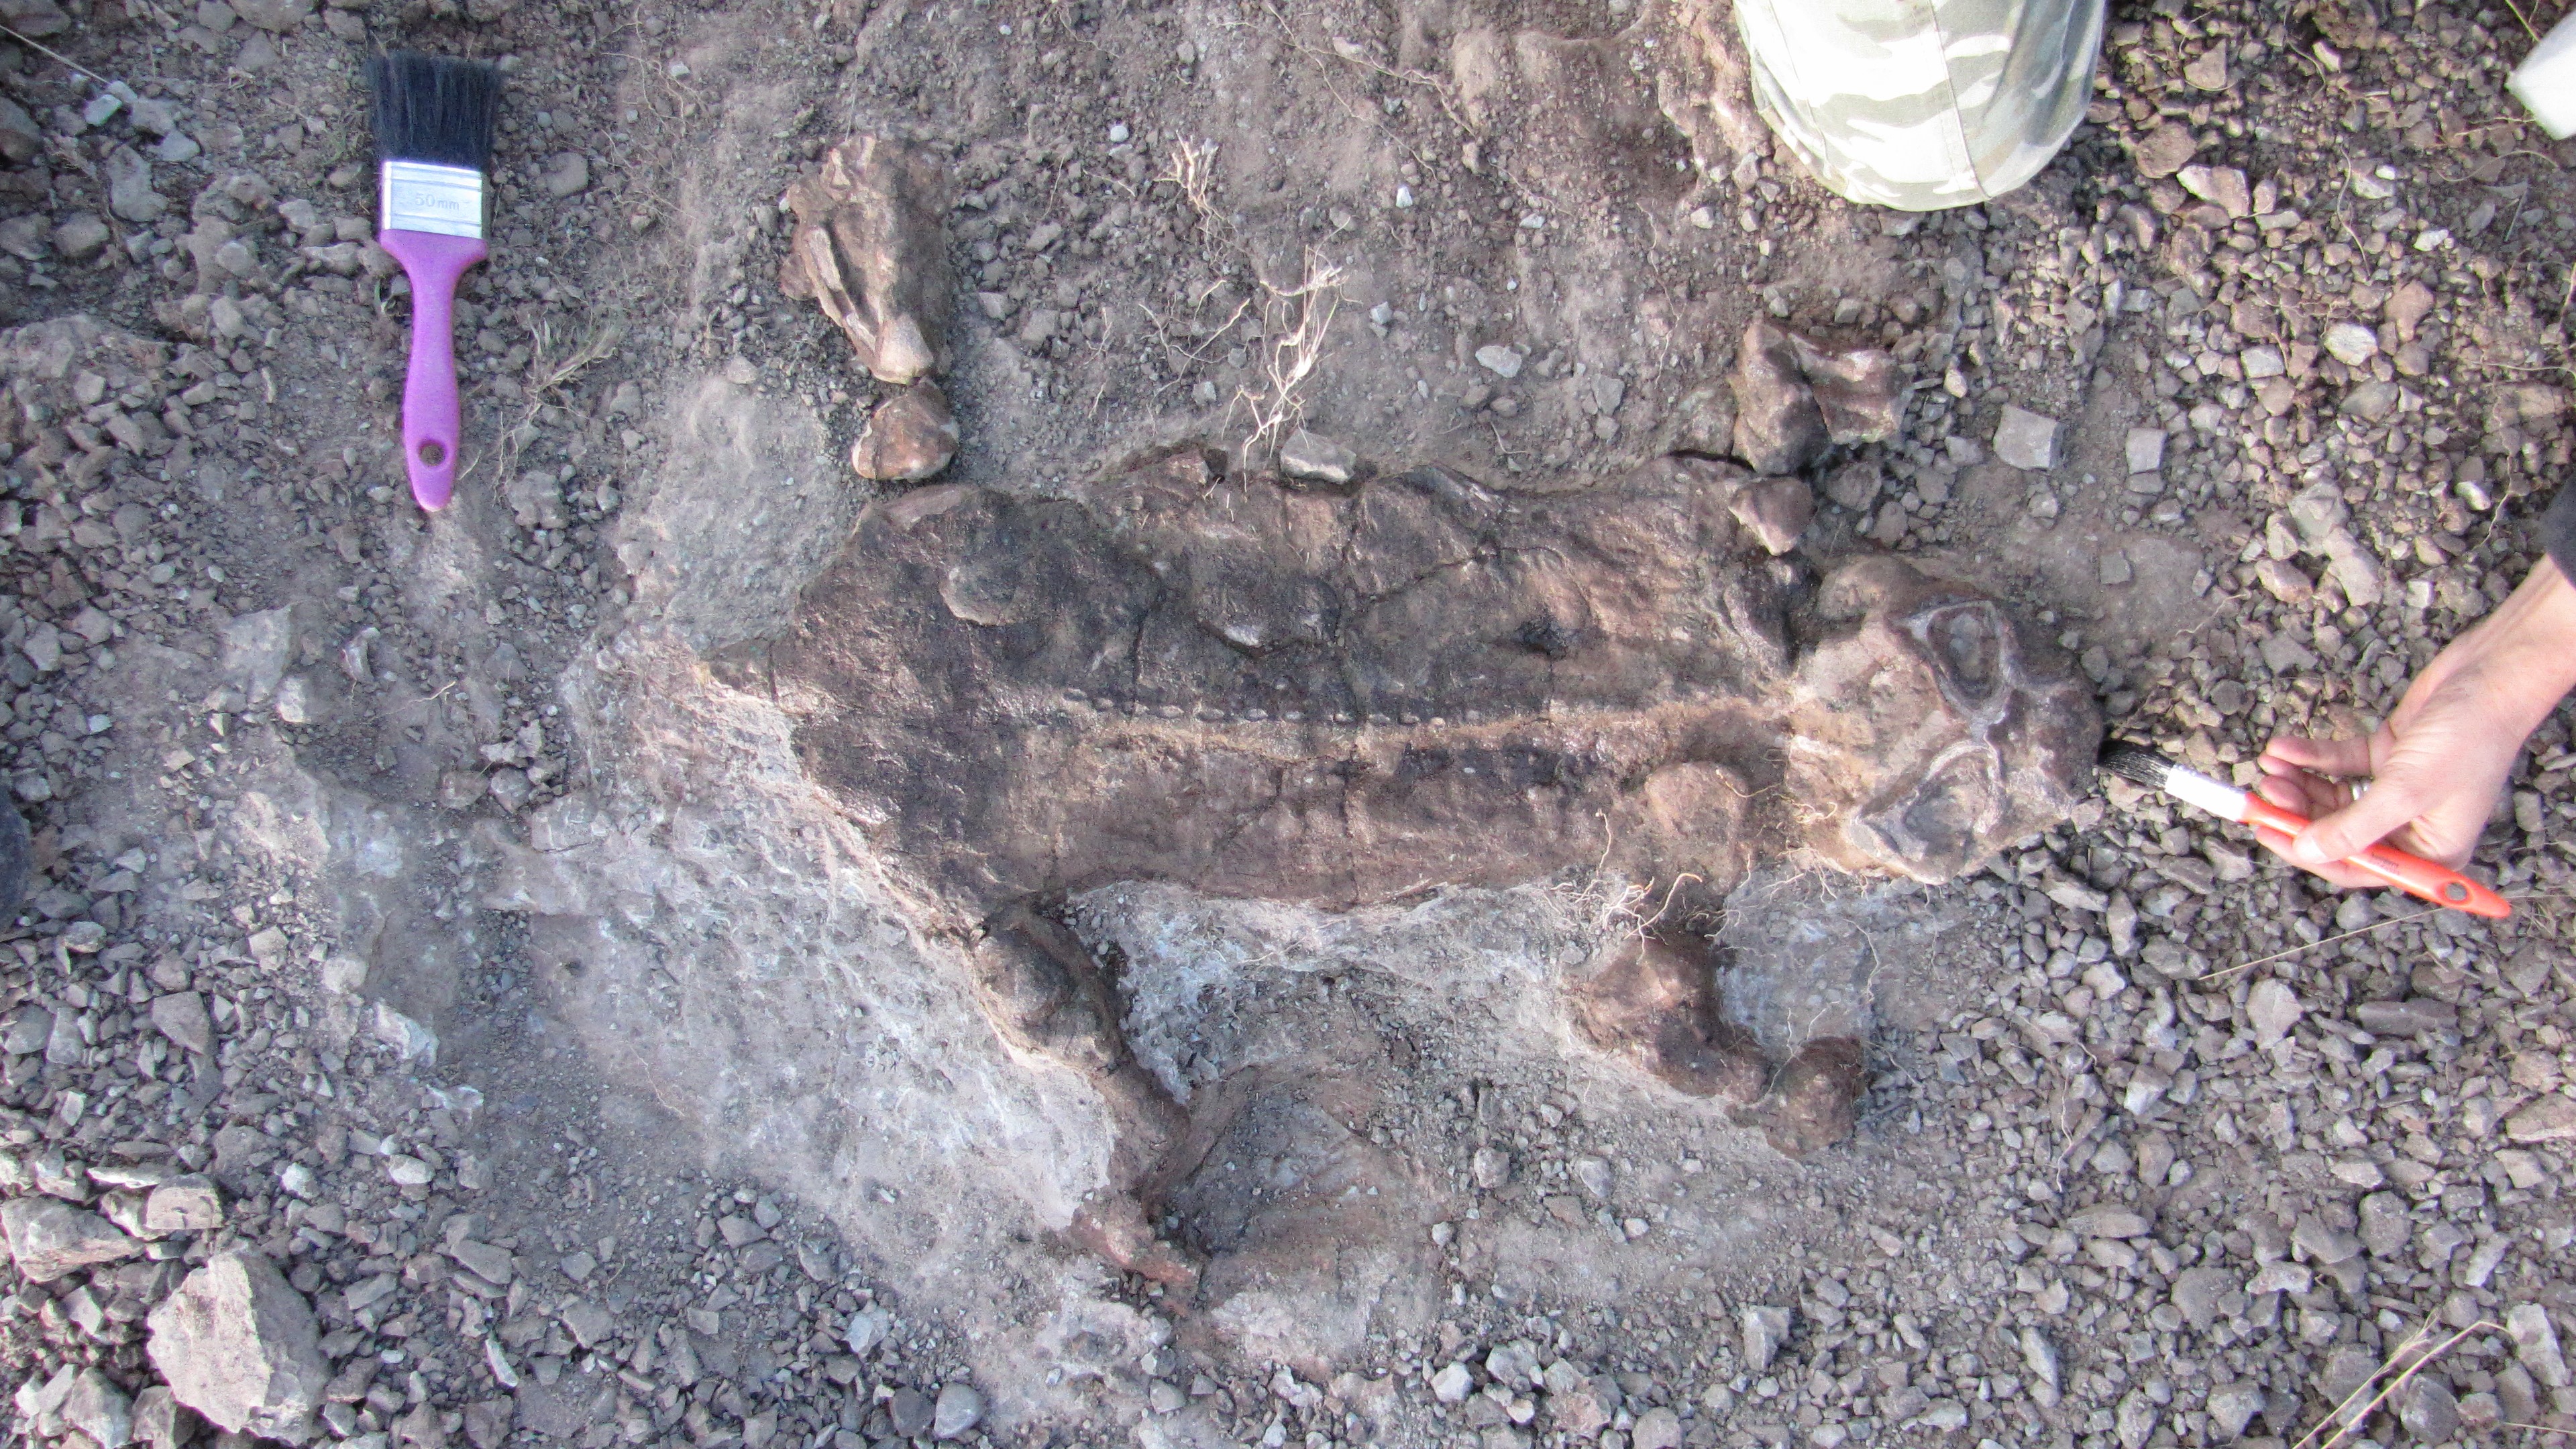 A photograph of a lystrosaurus fossil found in the field in South Africa. The squashed 